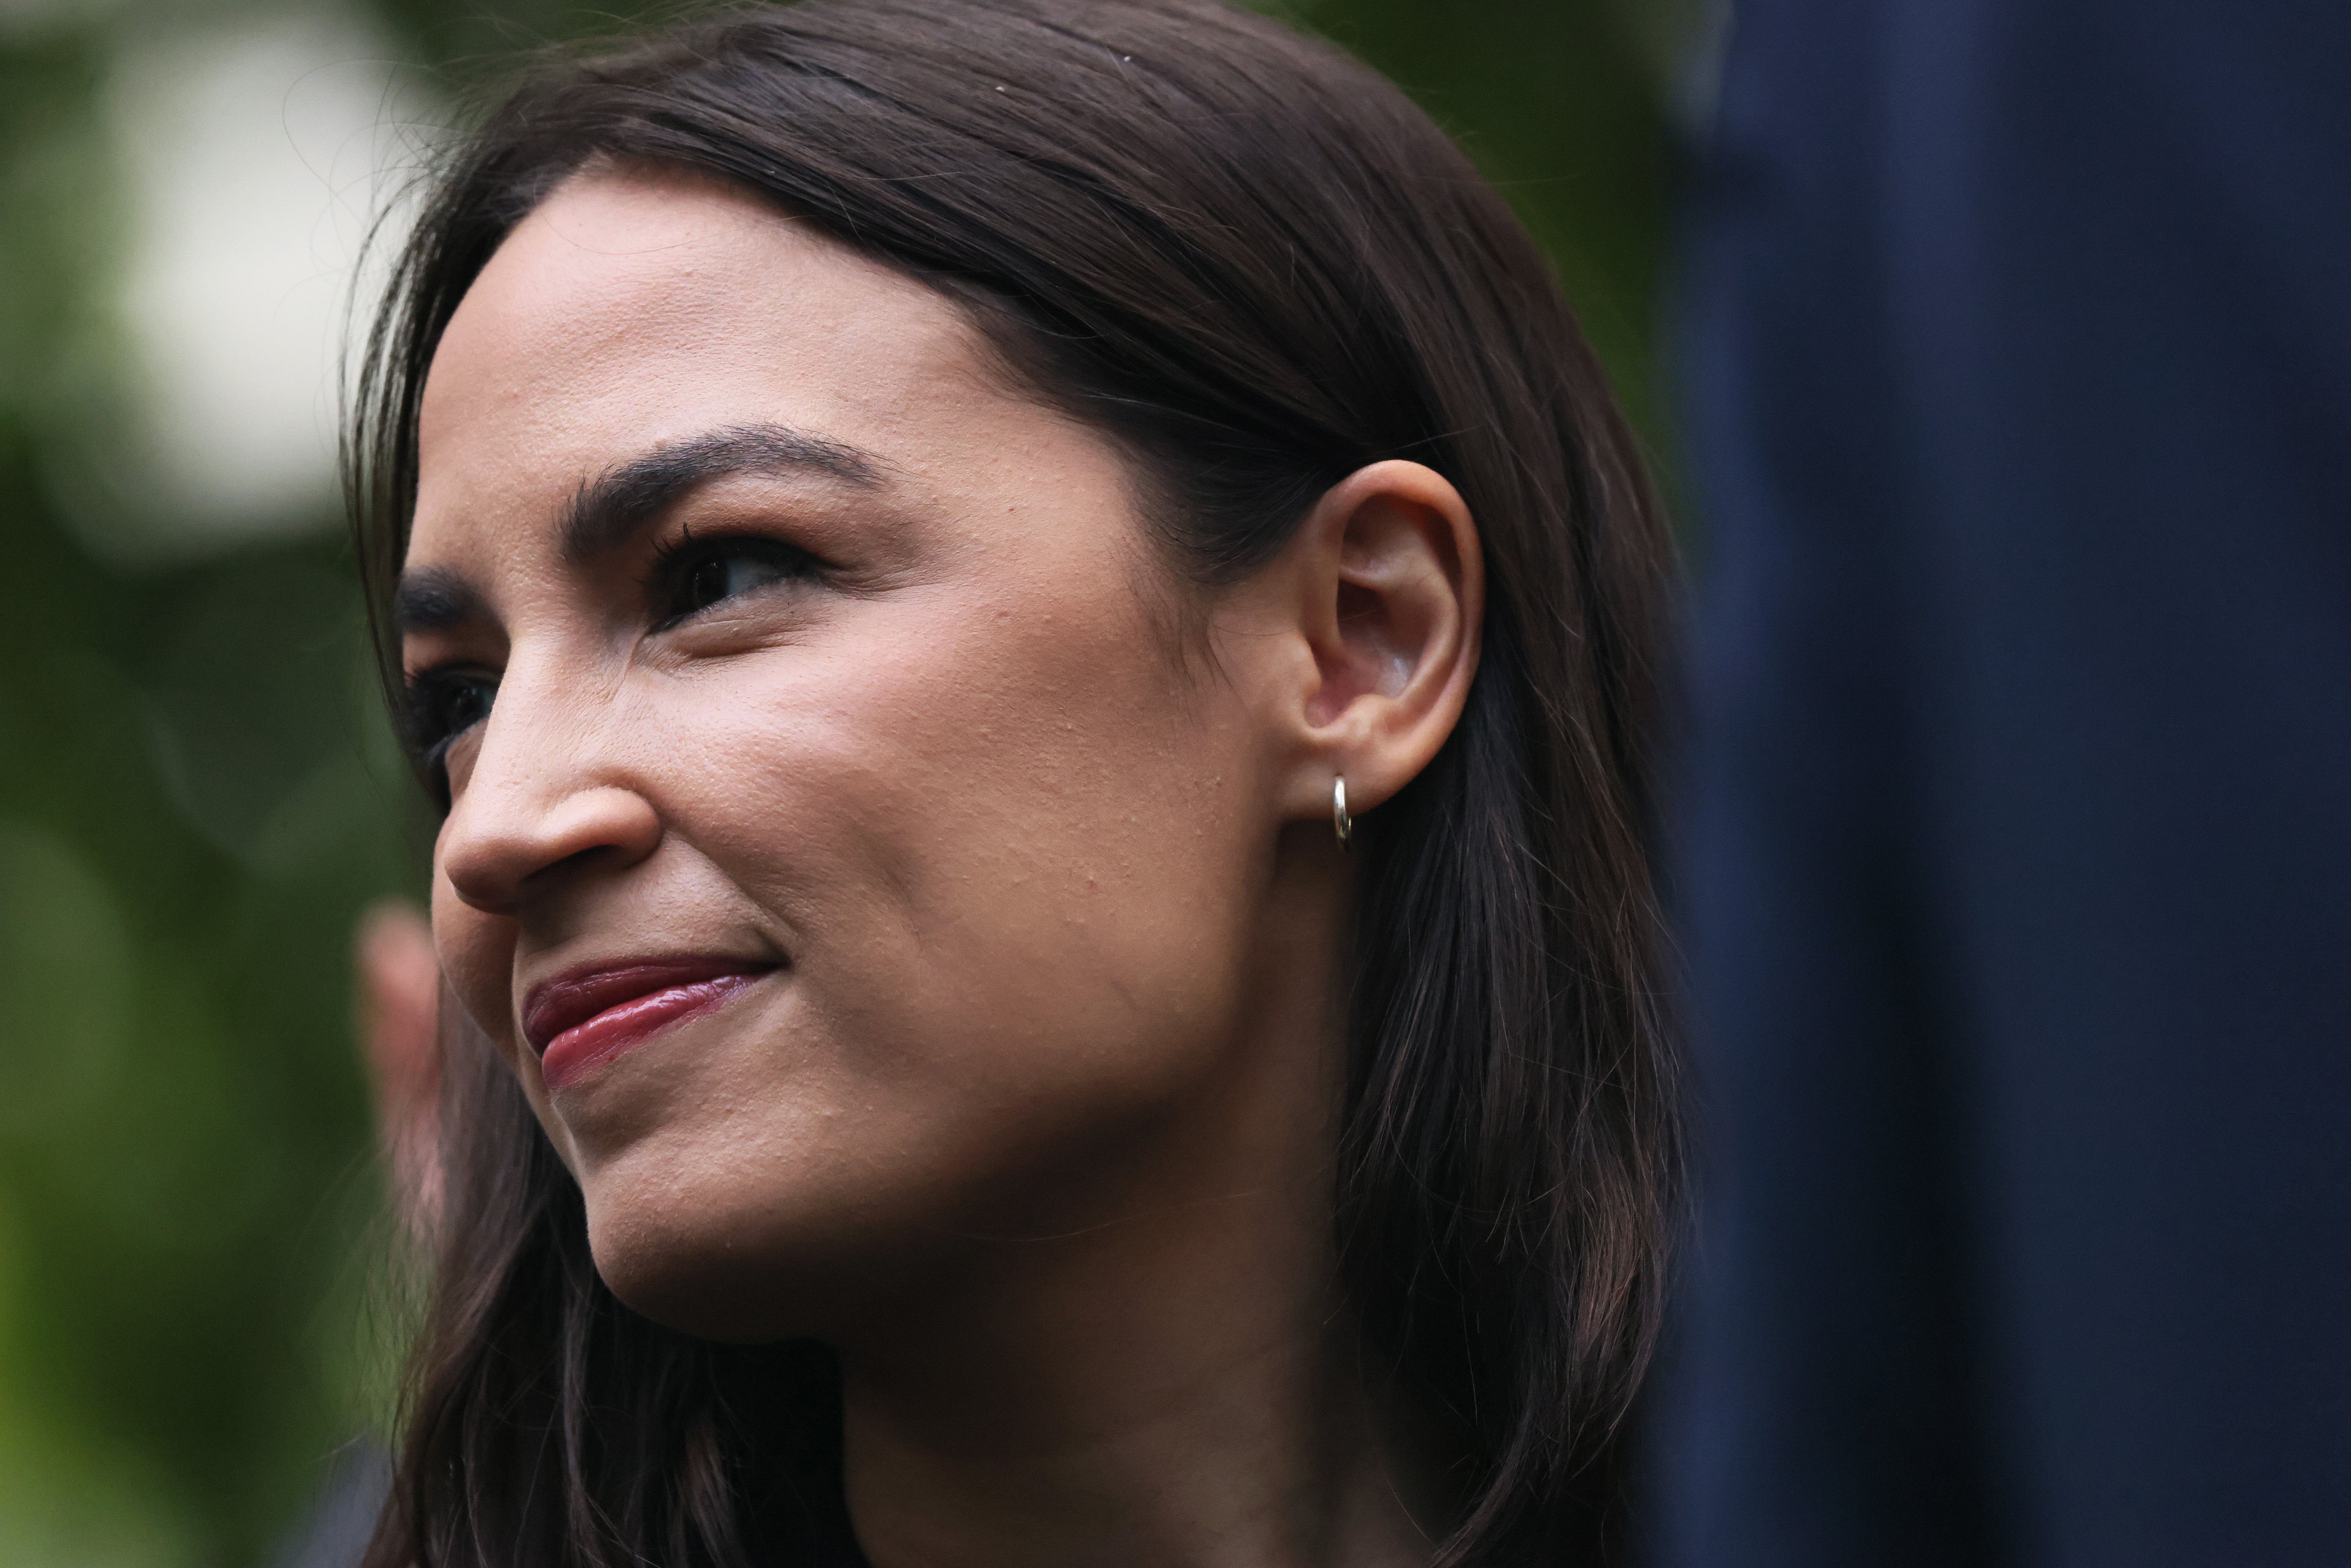 Rep. Alexandria Ocasio-Cortez (D-NY) has expressed openness to filing a motion to vacate to depose the speaker.